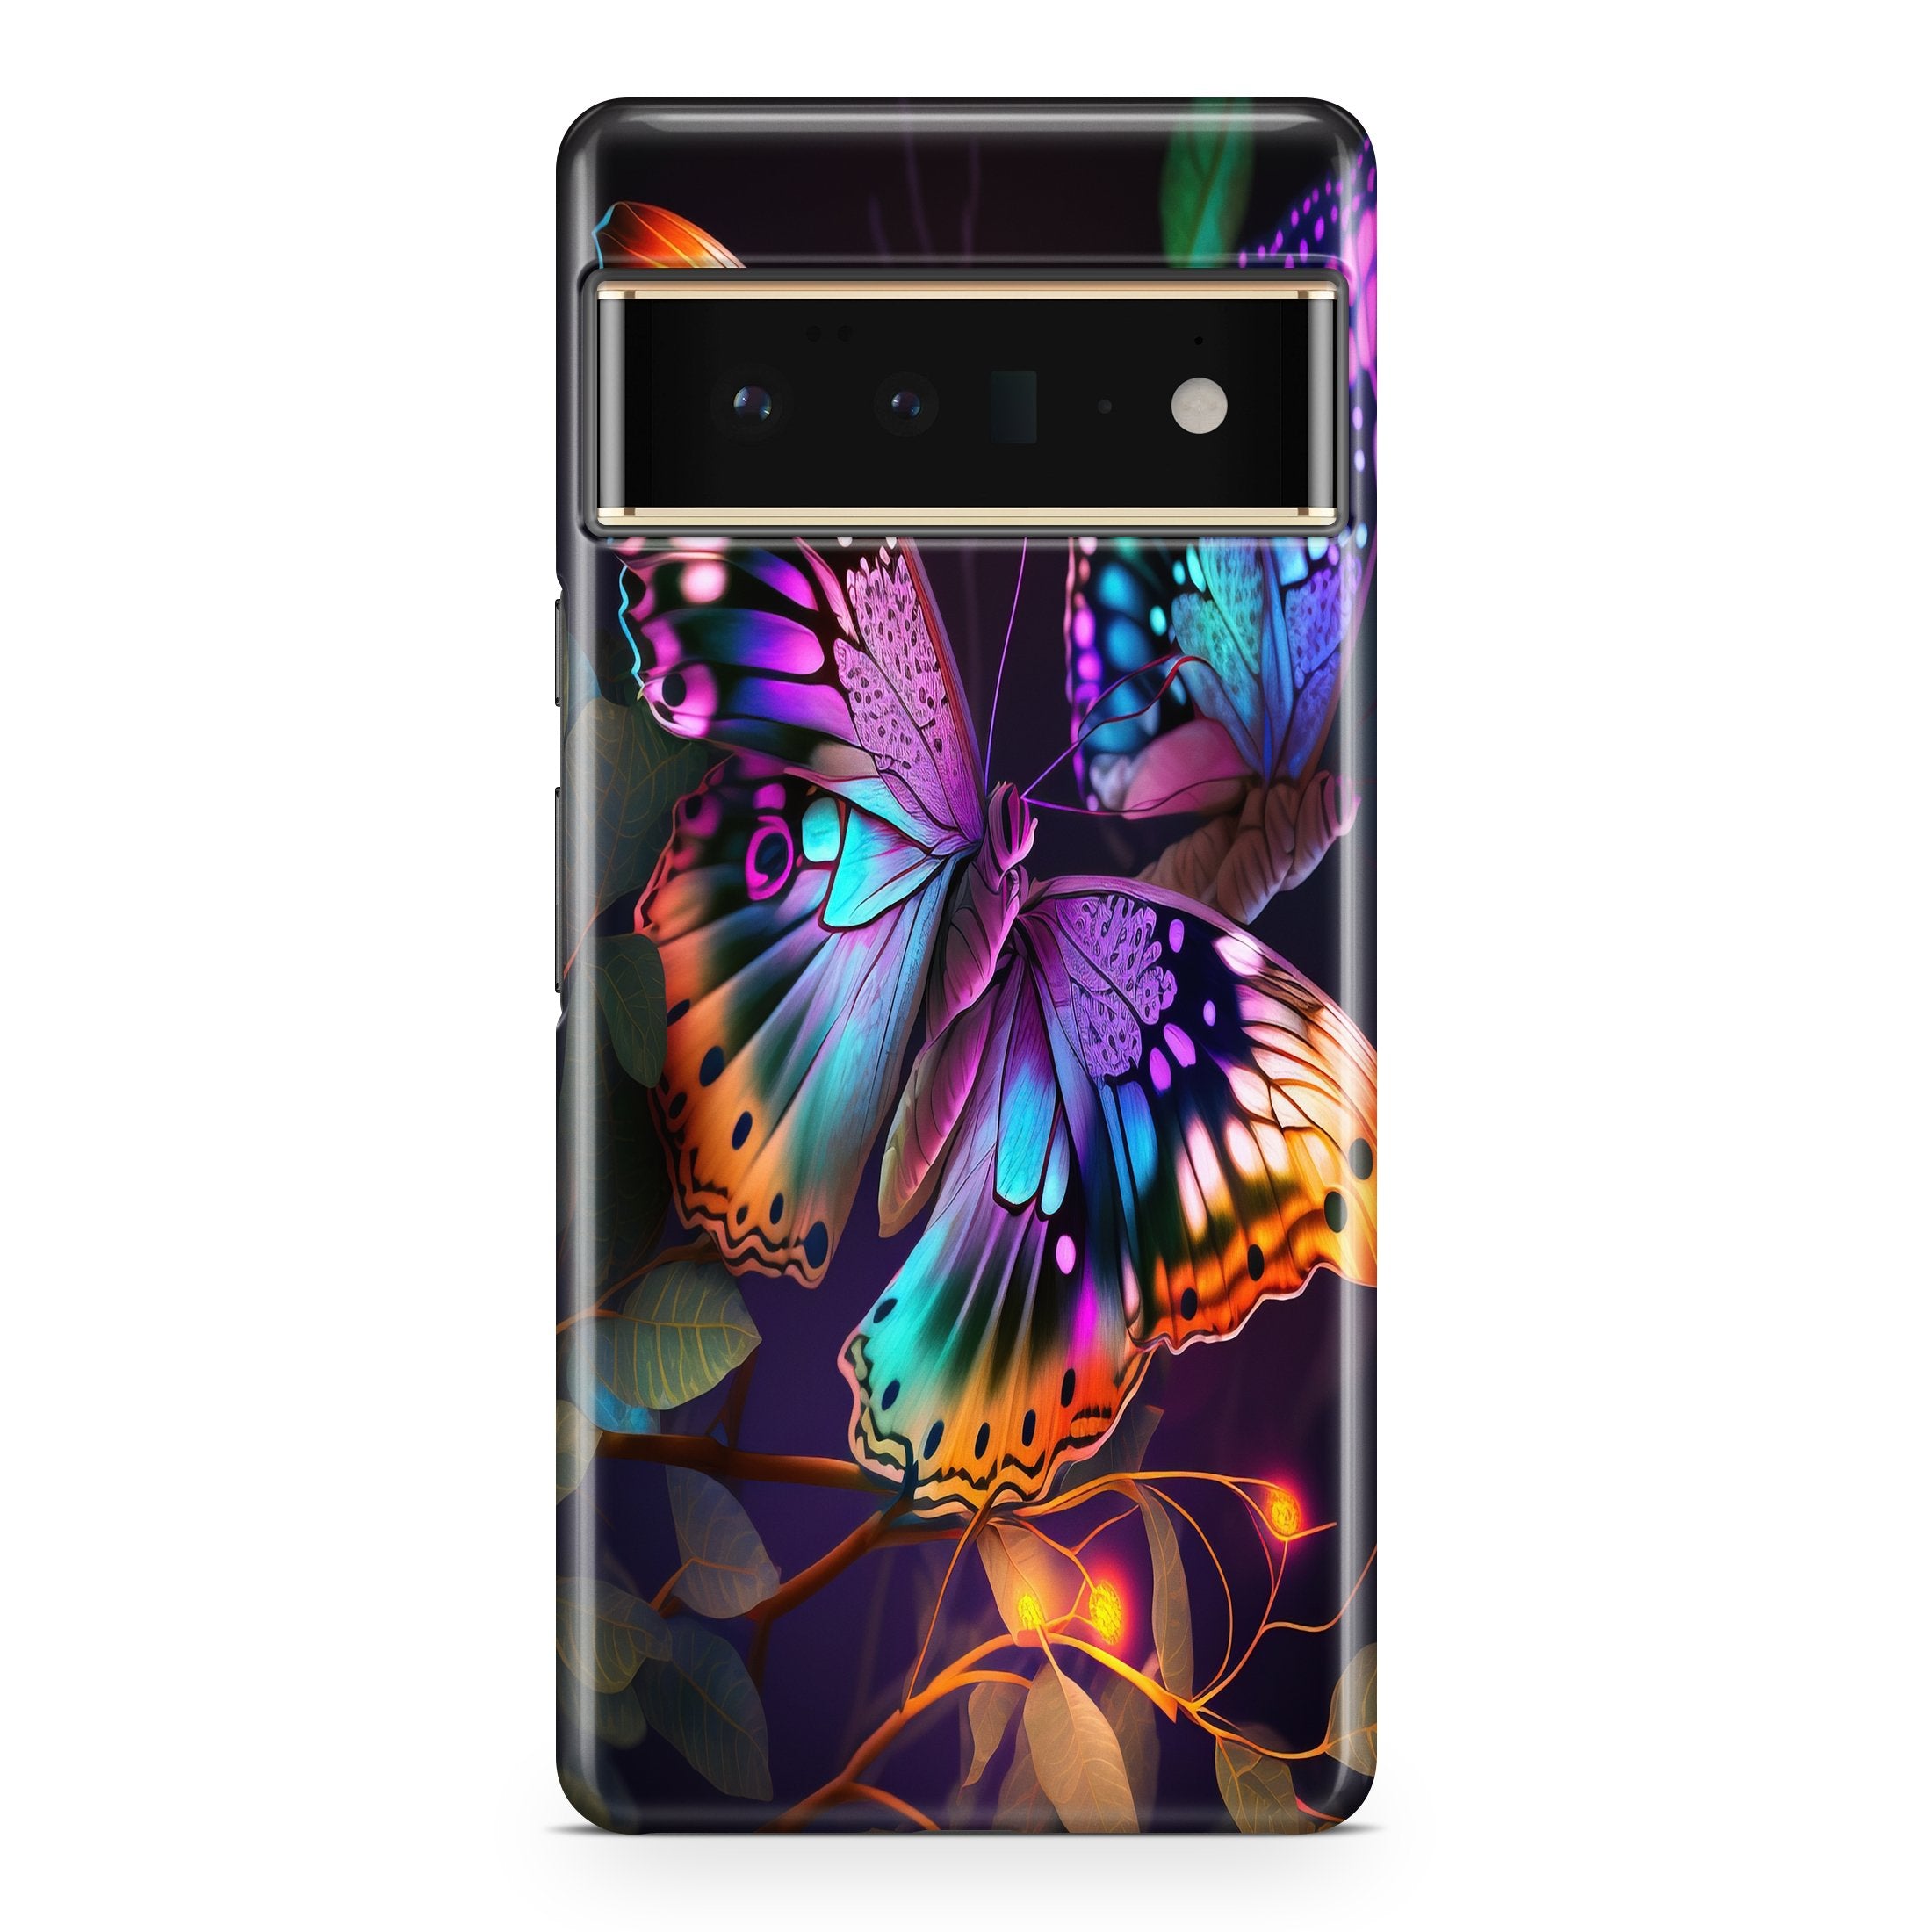 Atomic Butterflies - Google phone case designs by CaseSwagger